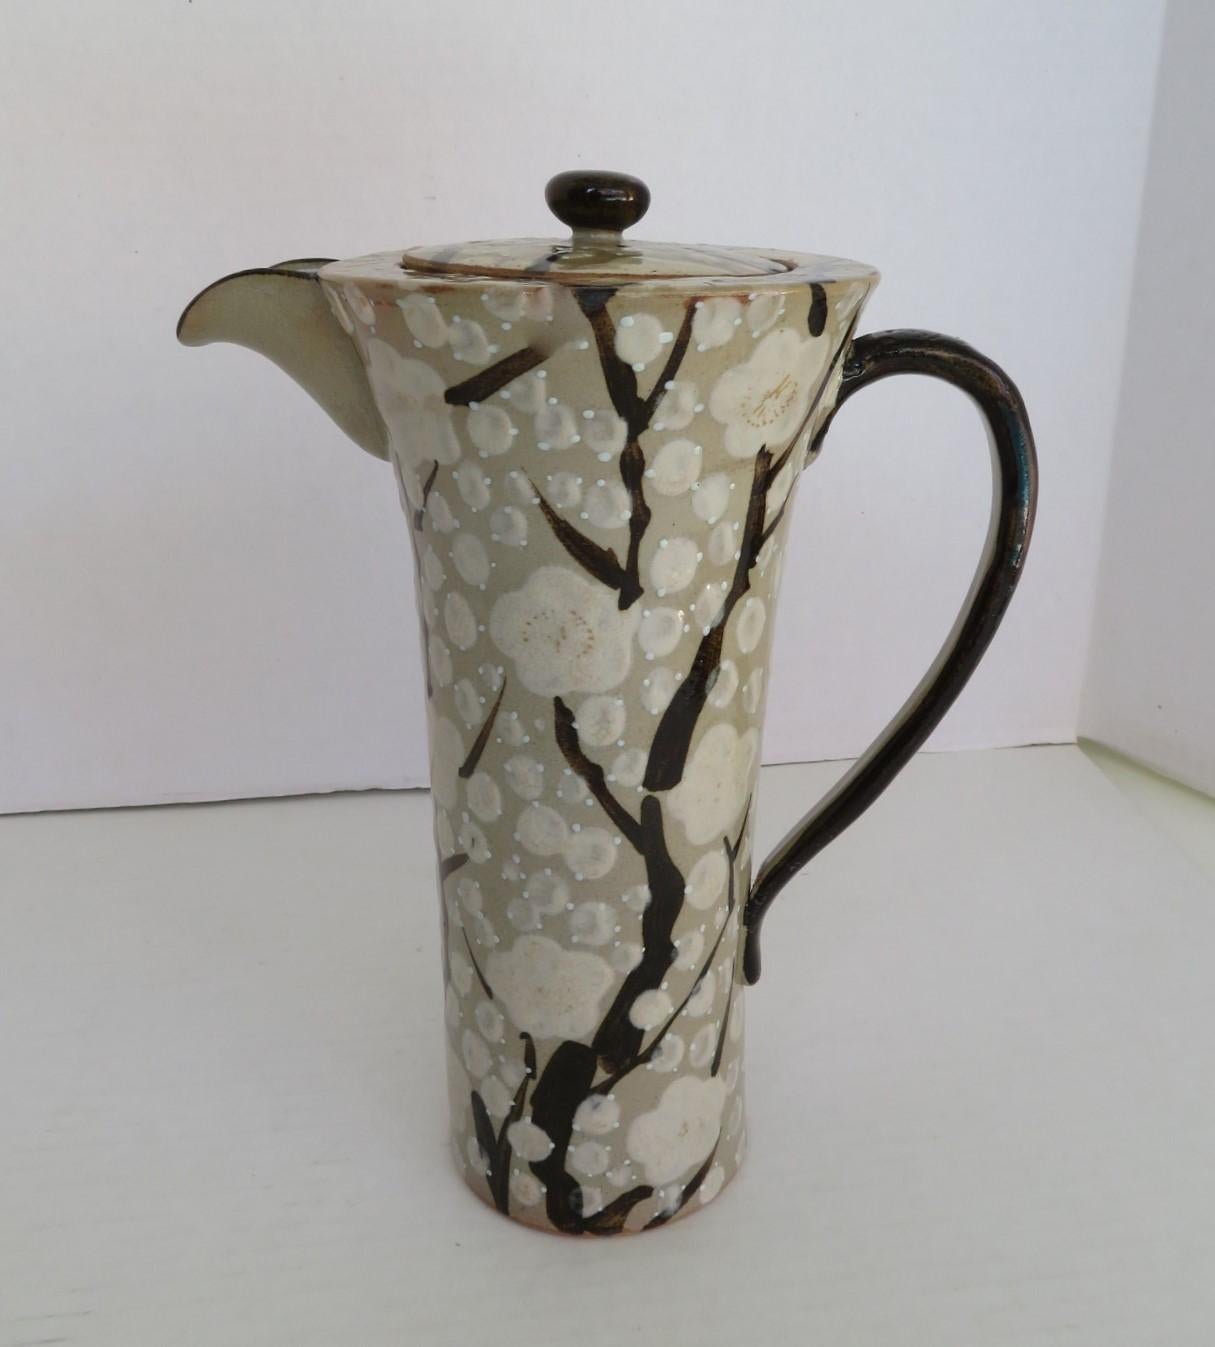 REDUCED FROM $325...Exquisite Mid-Century Modern Japanese tall and slender ceramic pitcher with top.  Decorated with stylized cherry blossom branches, with white flowers on a gray green background. Lovely form.  Very Good condition with minor wear